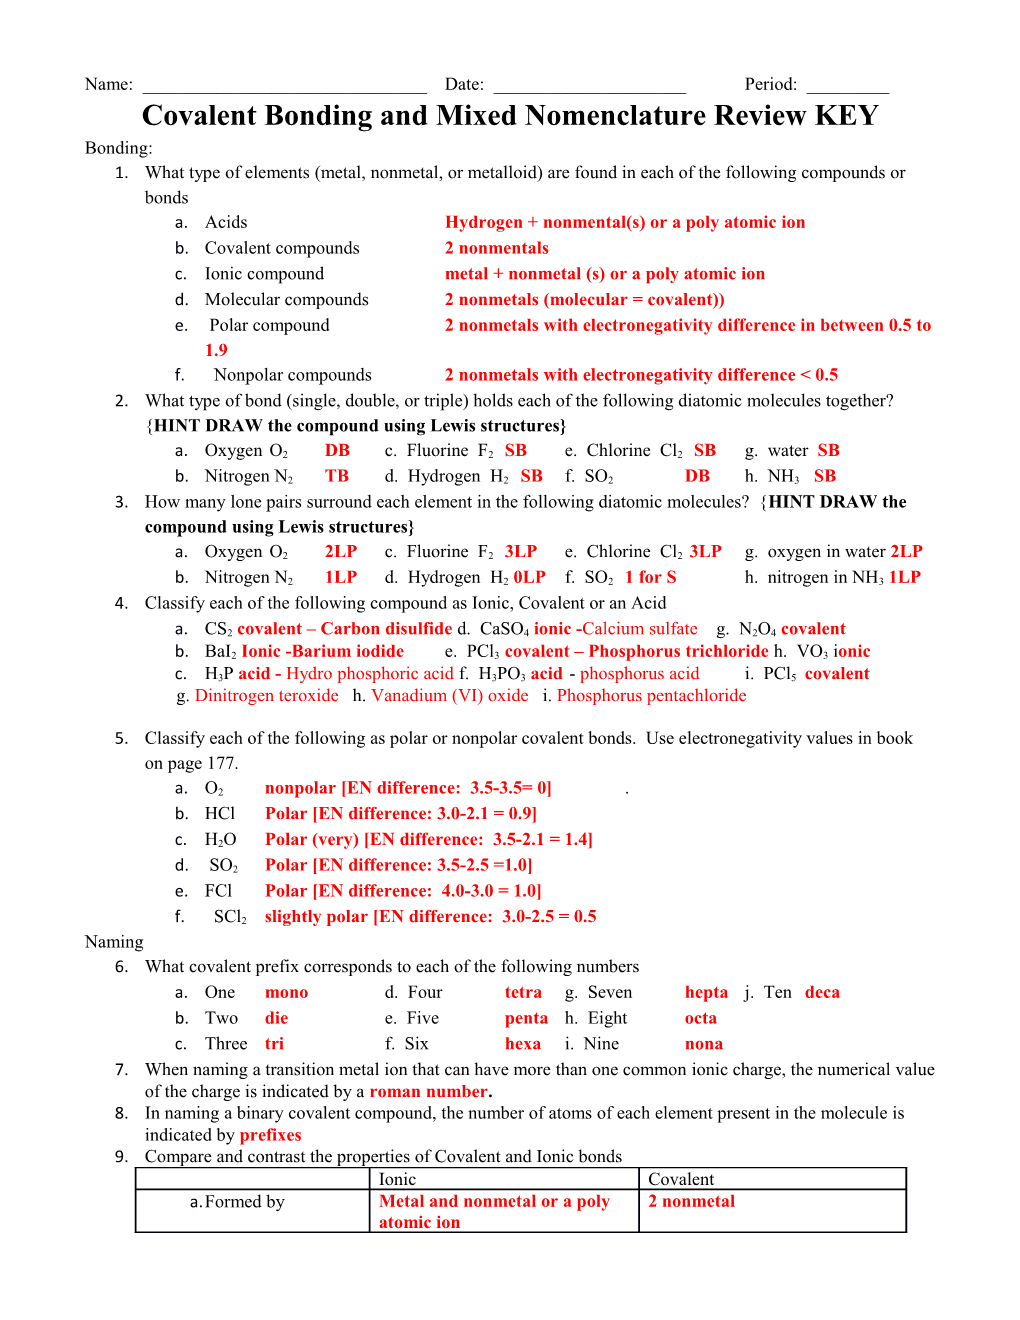 Covalent Bonding and Mixed Nomenclature Review KEY